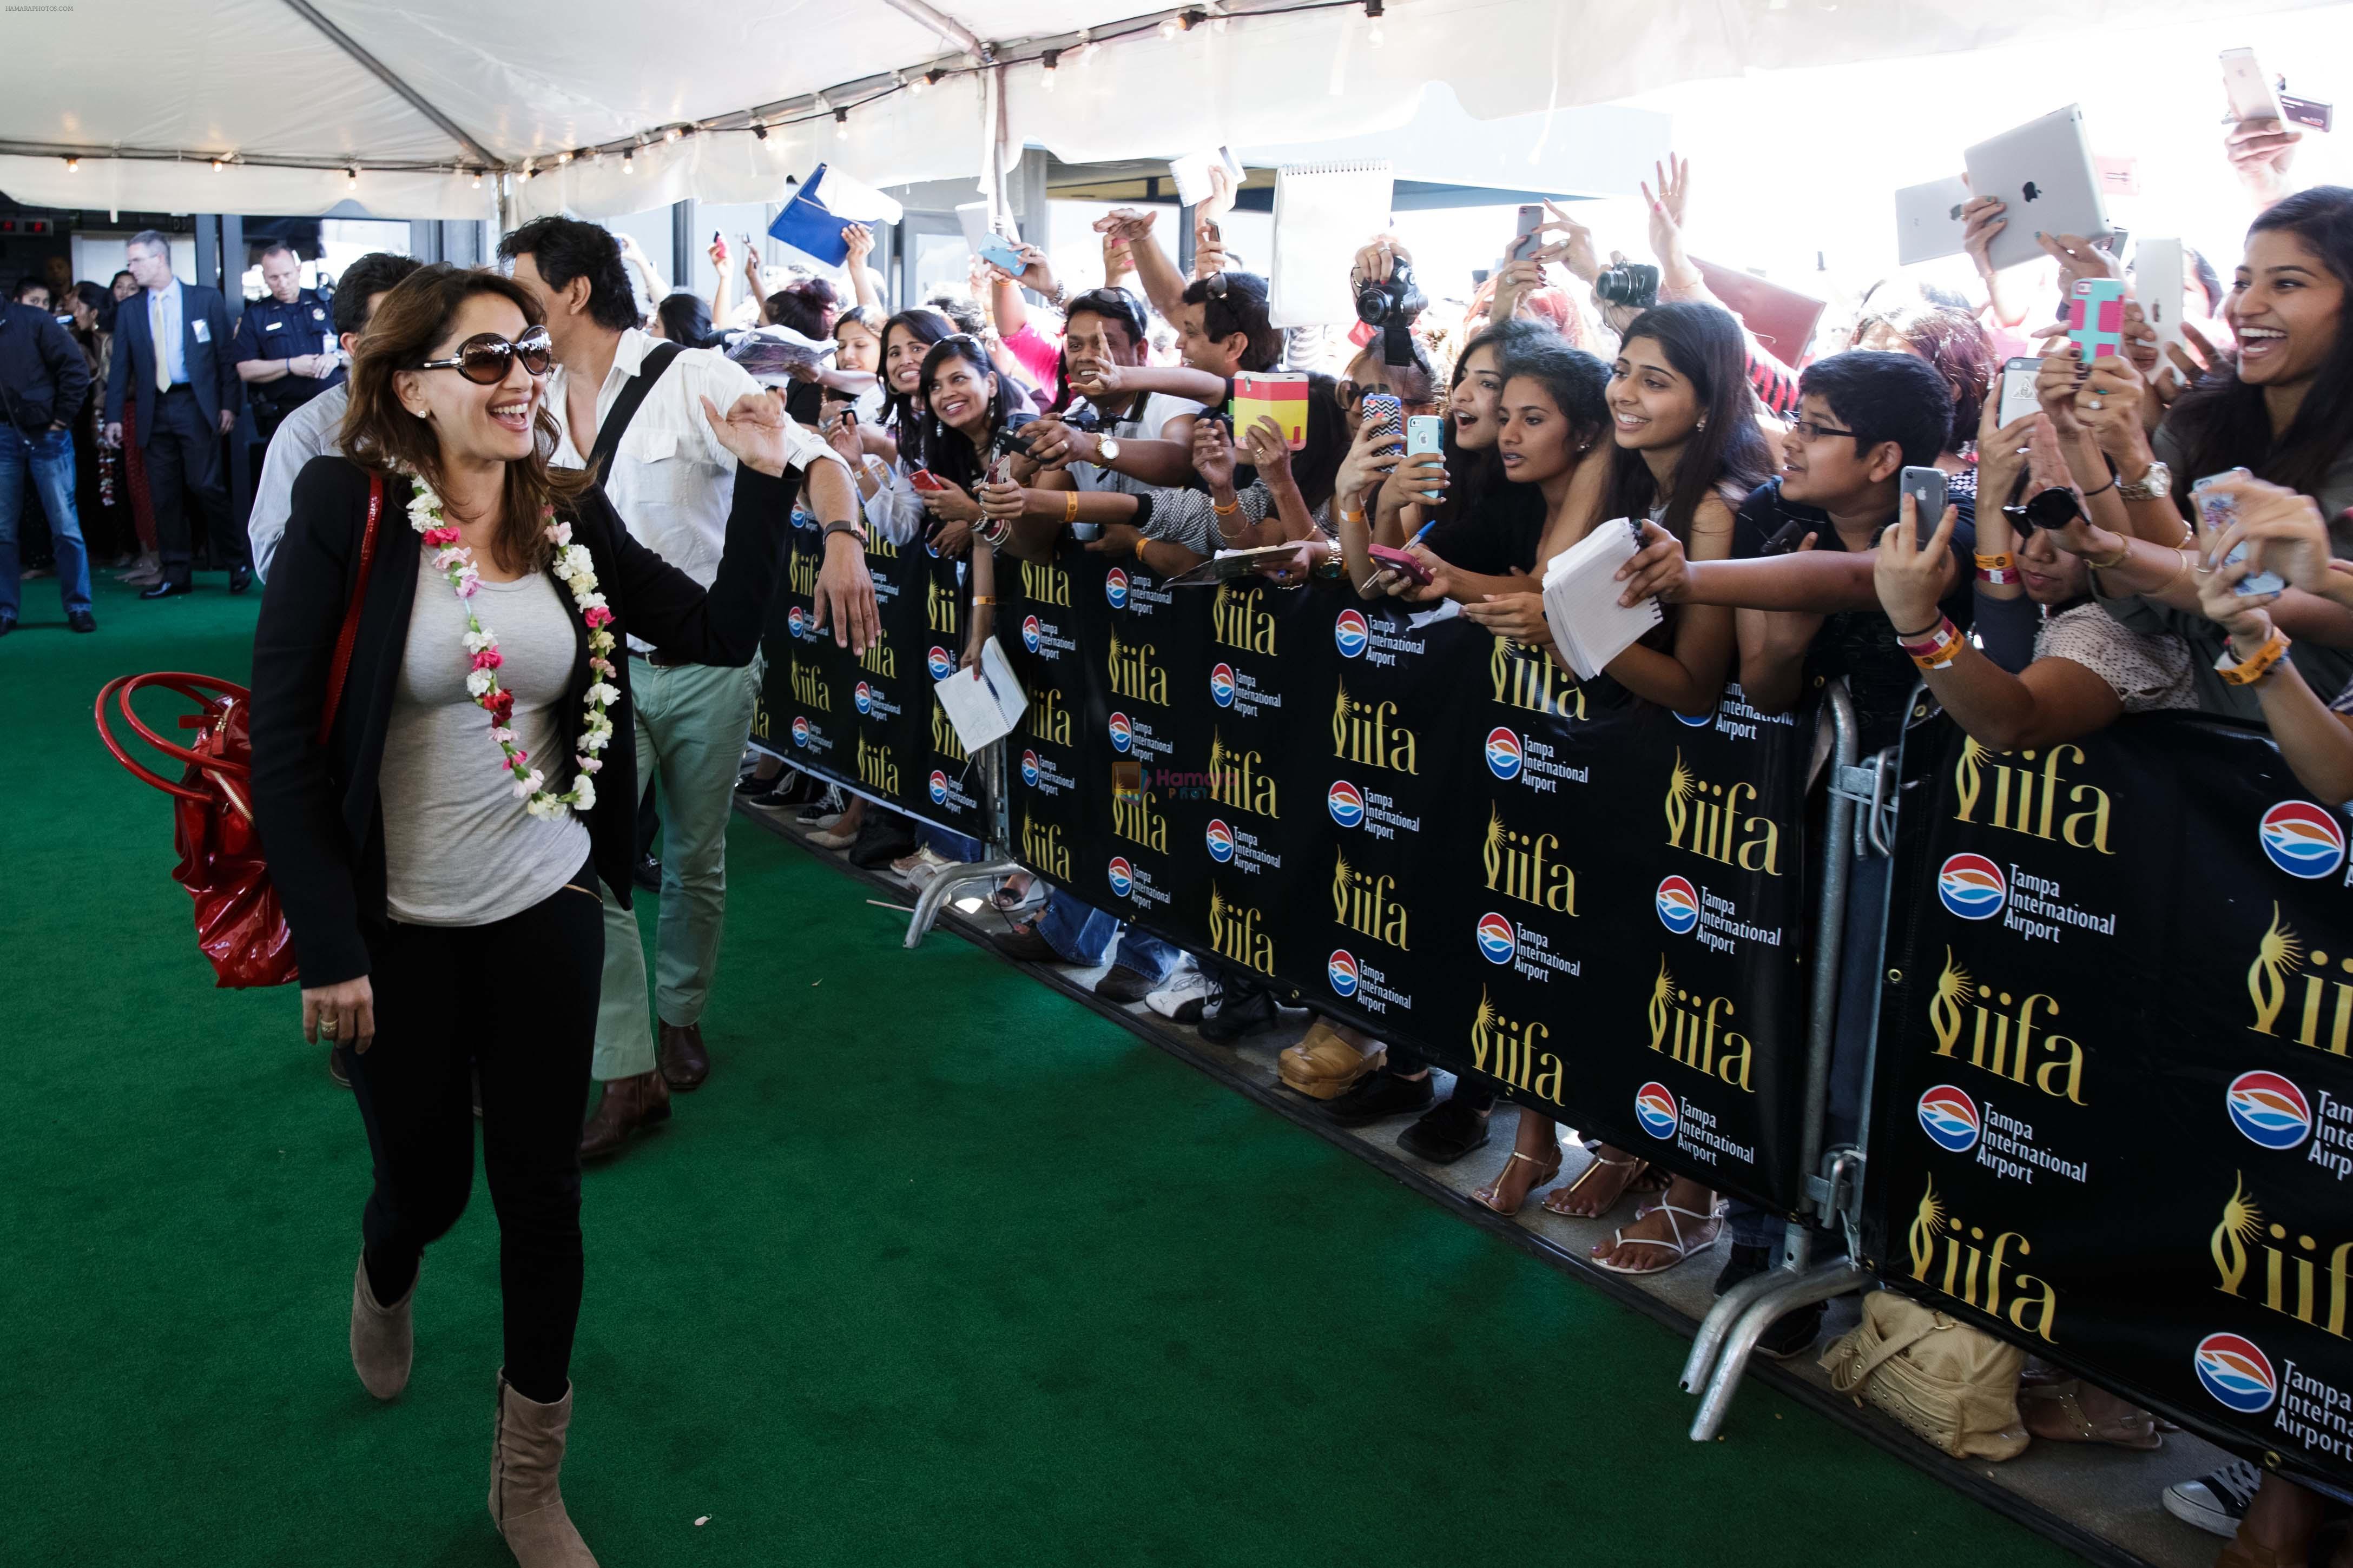 Madhuri Dixit Nene arrives at Tampa International Airpot on 25th April 2014 for IIFA